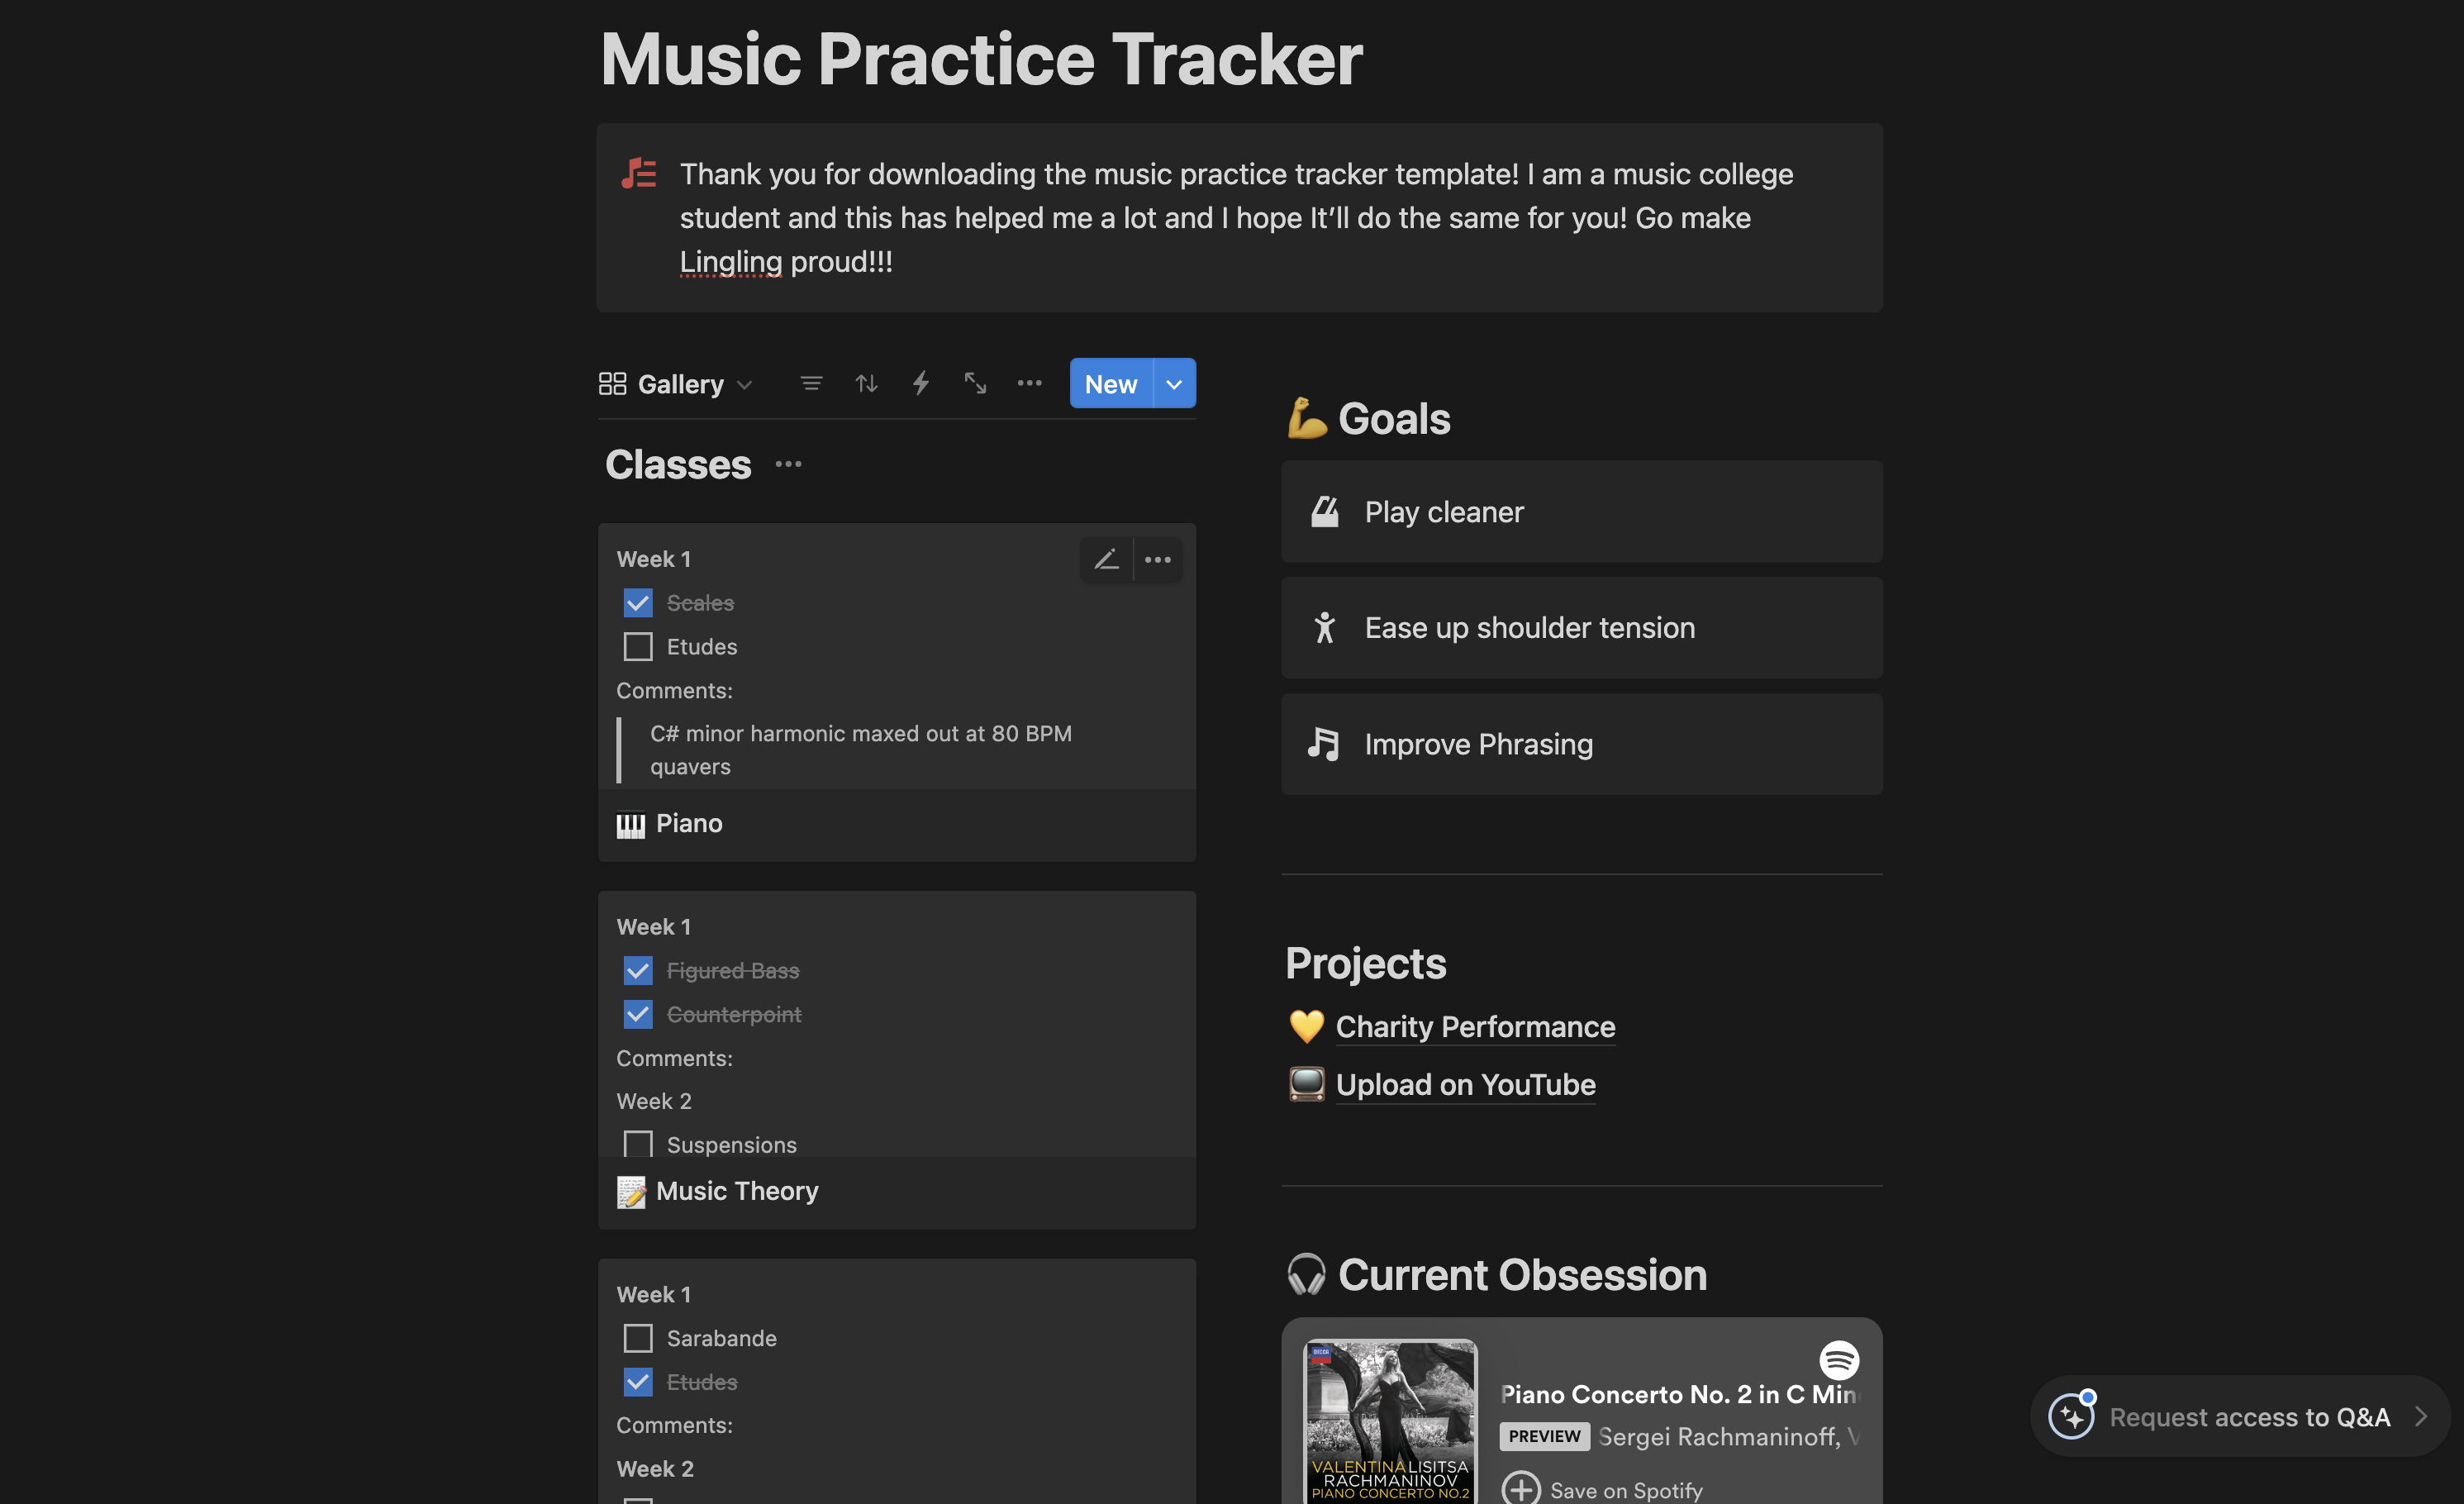 Track your class and practice progress, goals and projects with this template. It can also be used for whatever subjects you need help keeping track of. I am a music college student with ADHD so this has helped me a lot. I hope It’ll do the same for you!